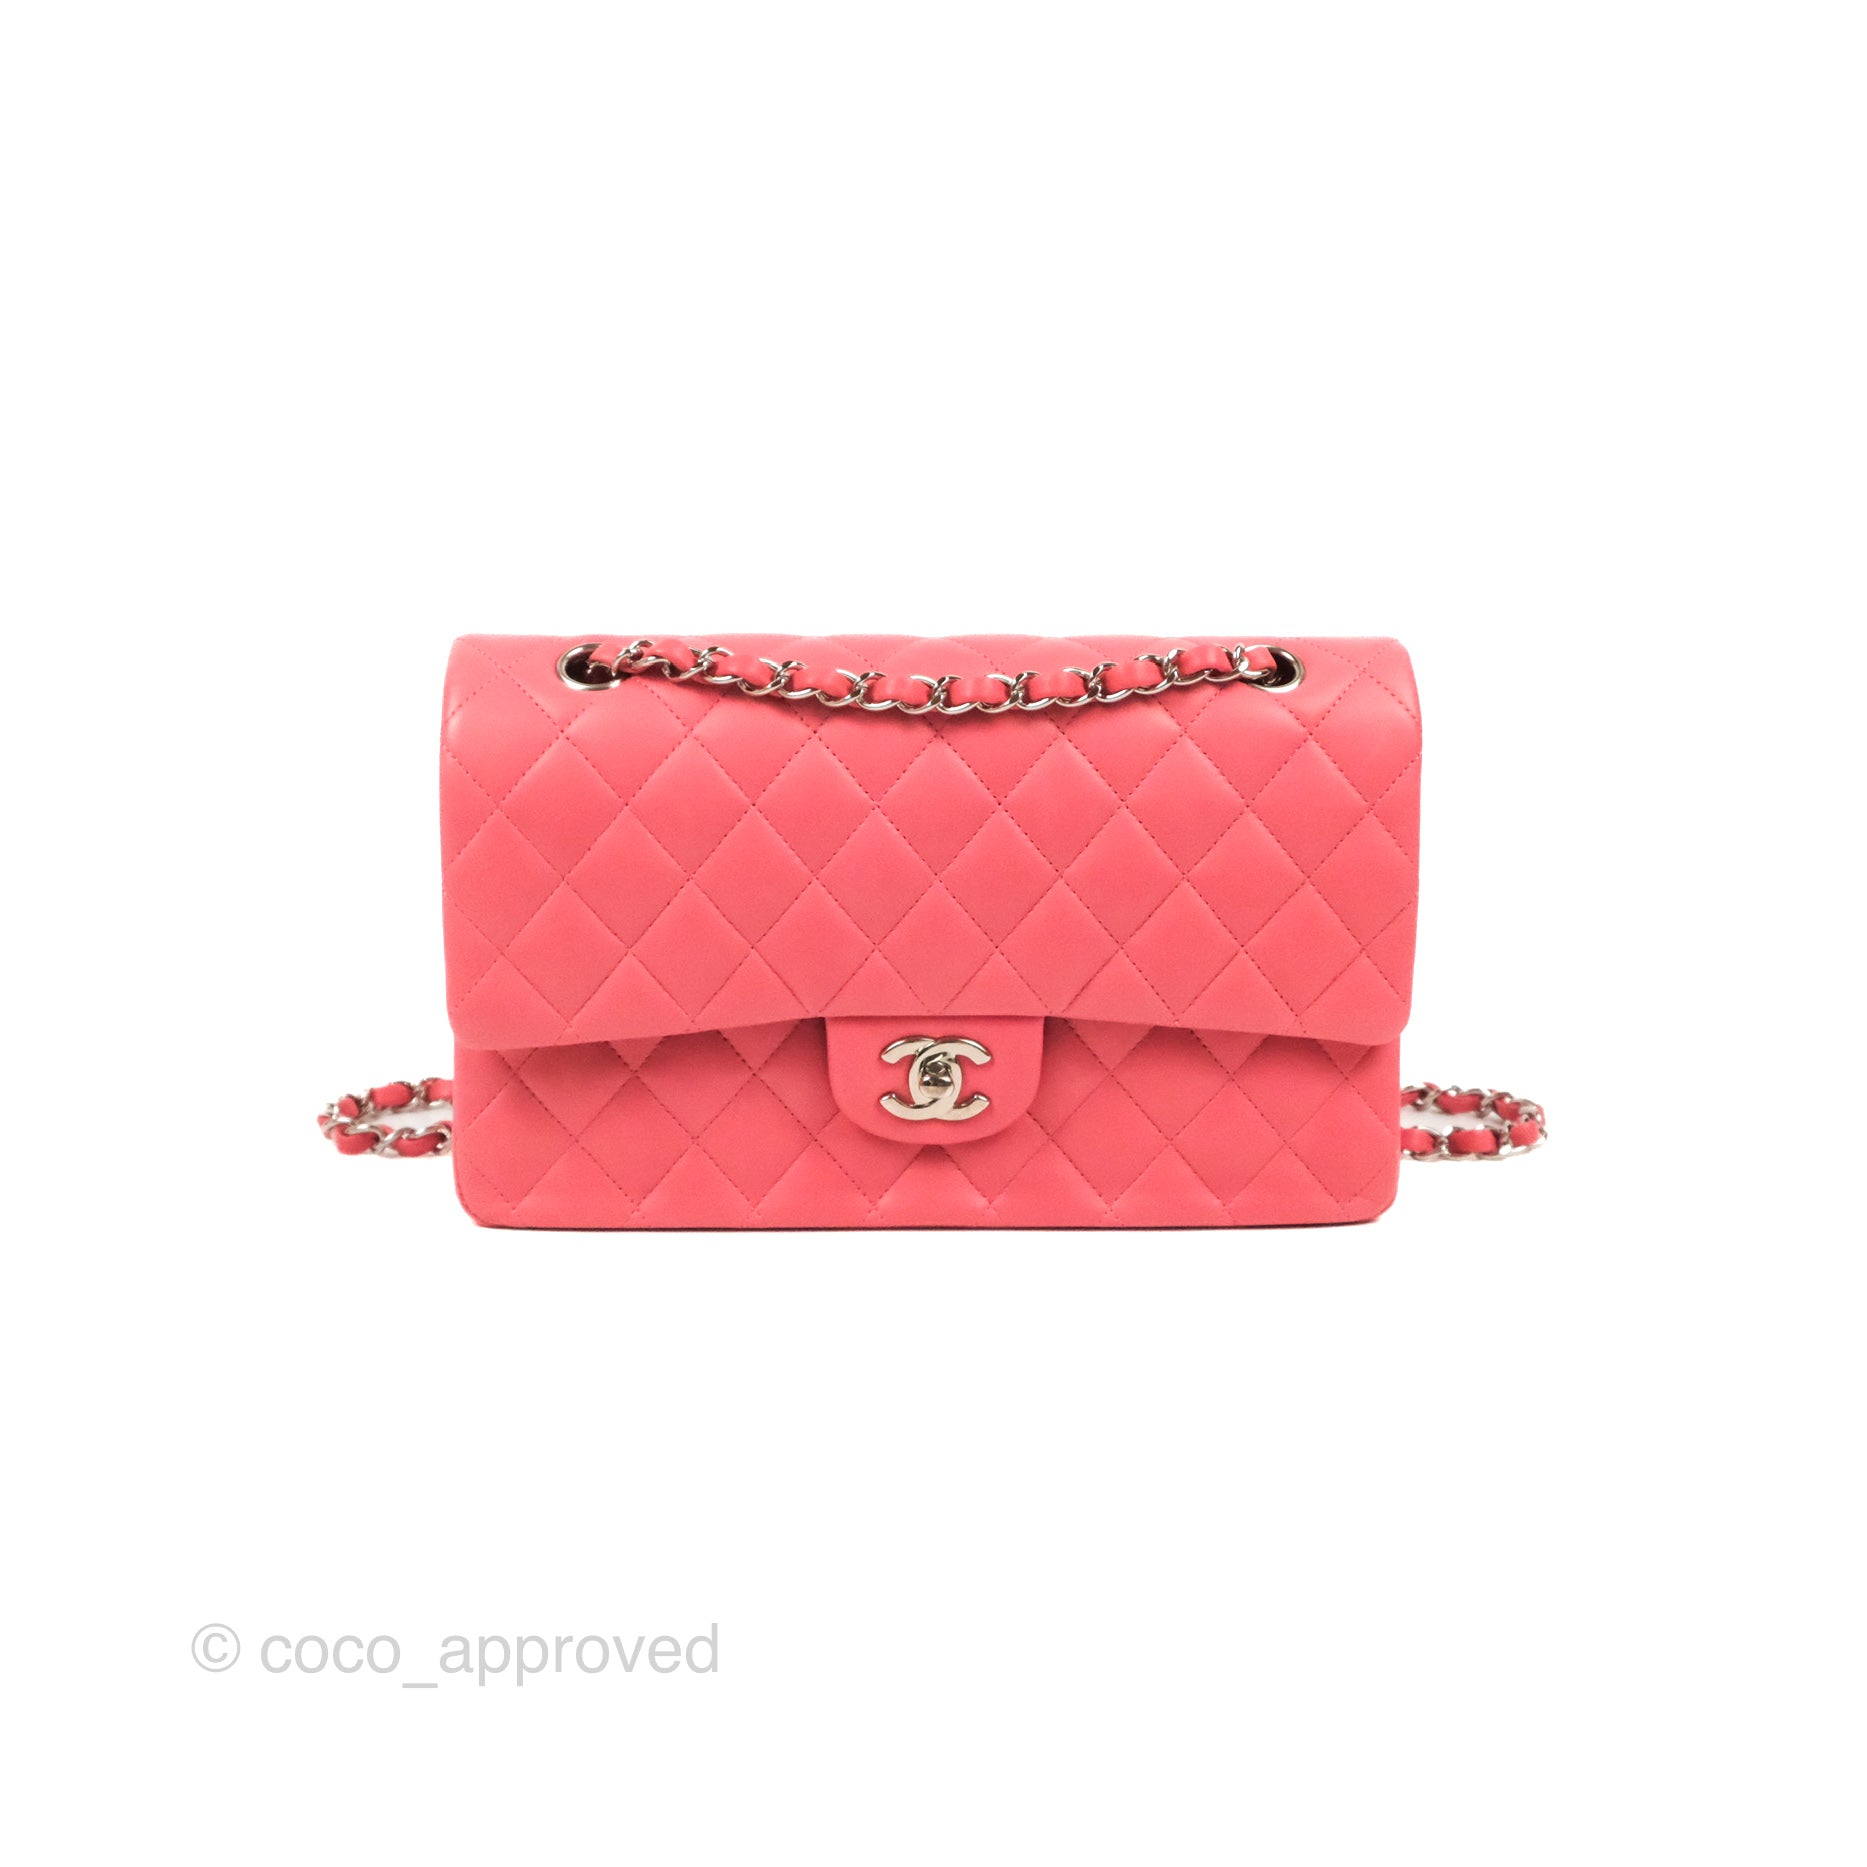 Chanel Classic Medium, Pink Lambskin with Silver Hardware, Preowned in  Dustbag WA001